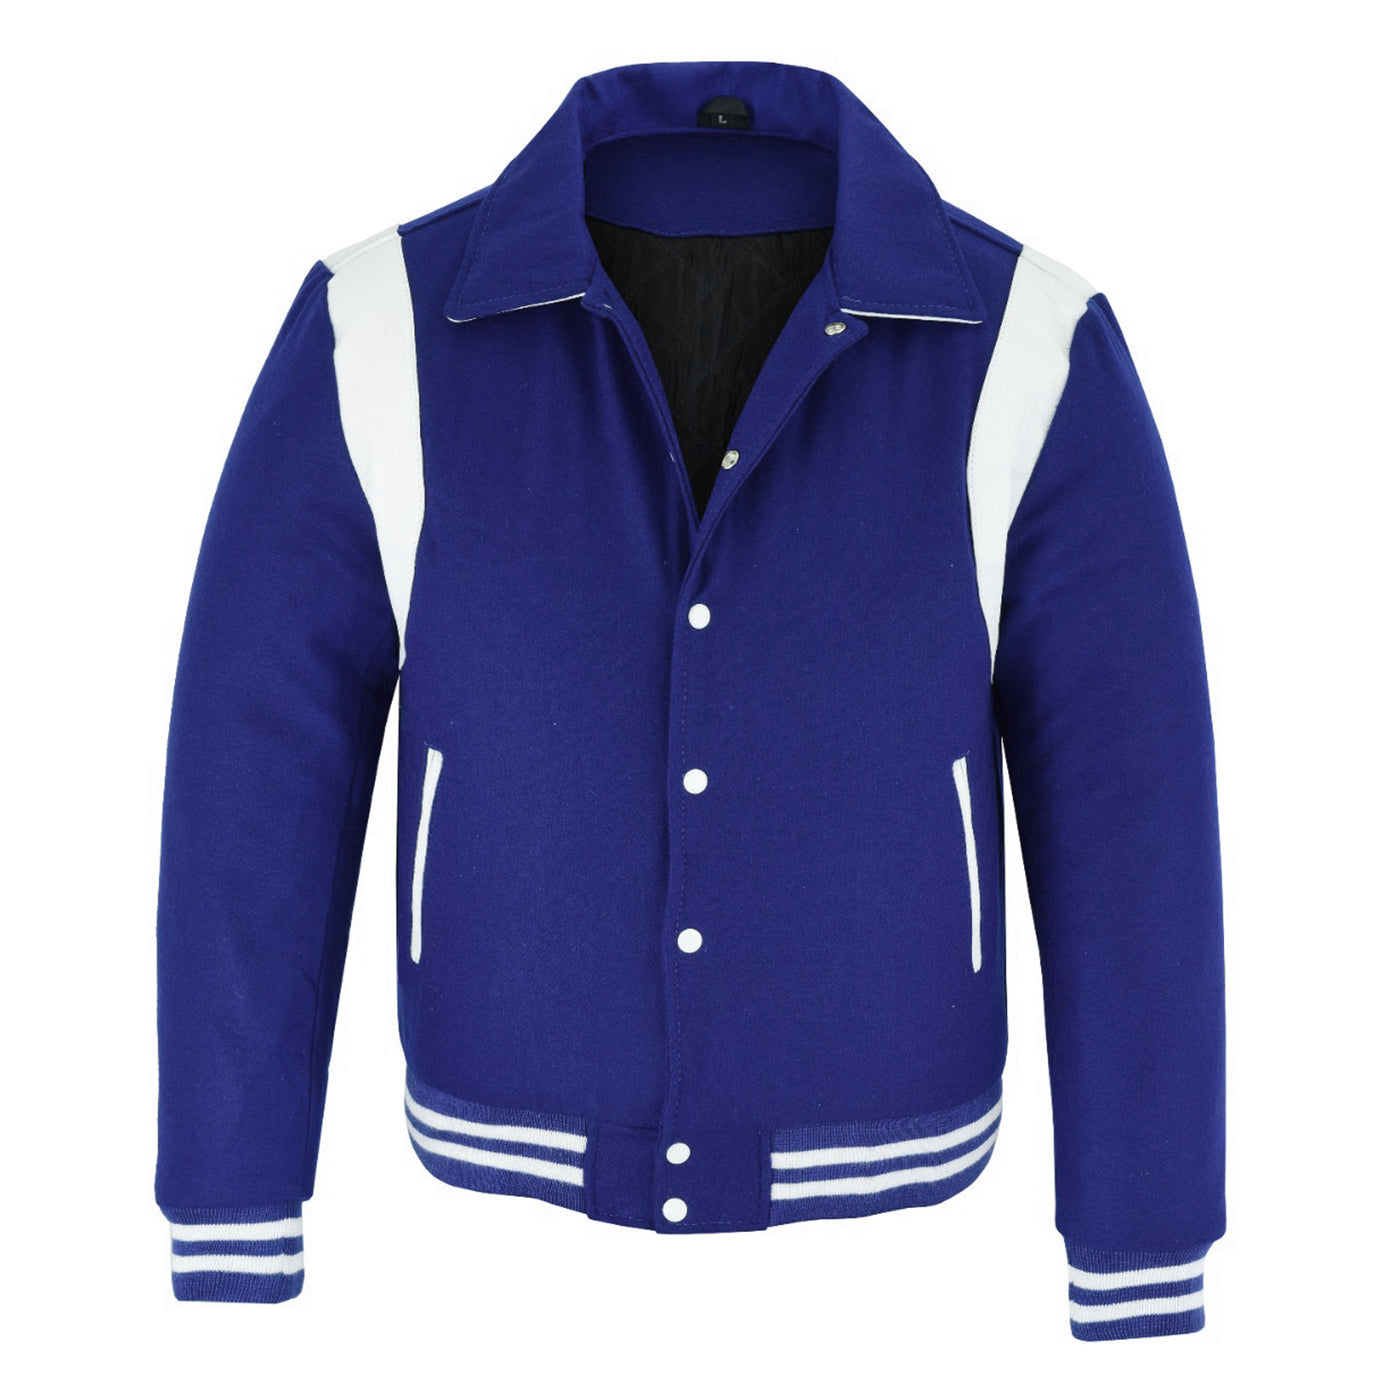 Classic Varsity Letterman Baseball College Jacket Navy Wool with White Single Leather Strip